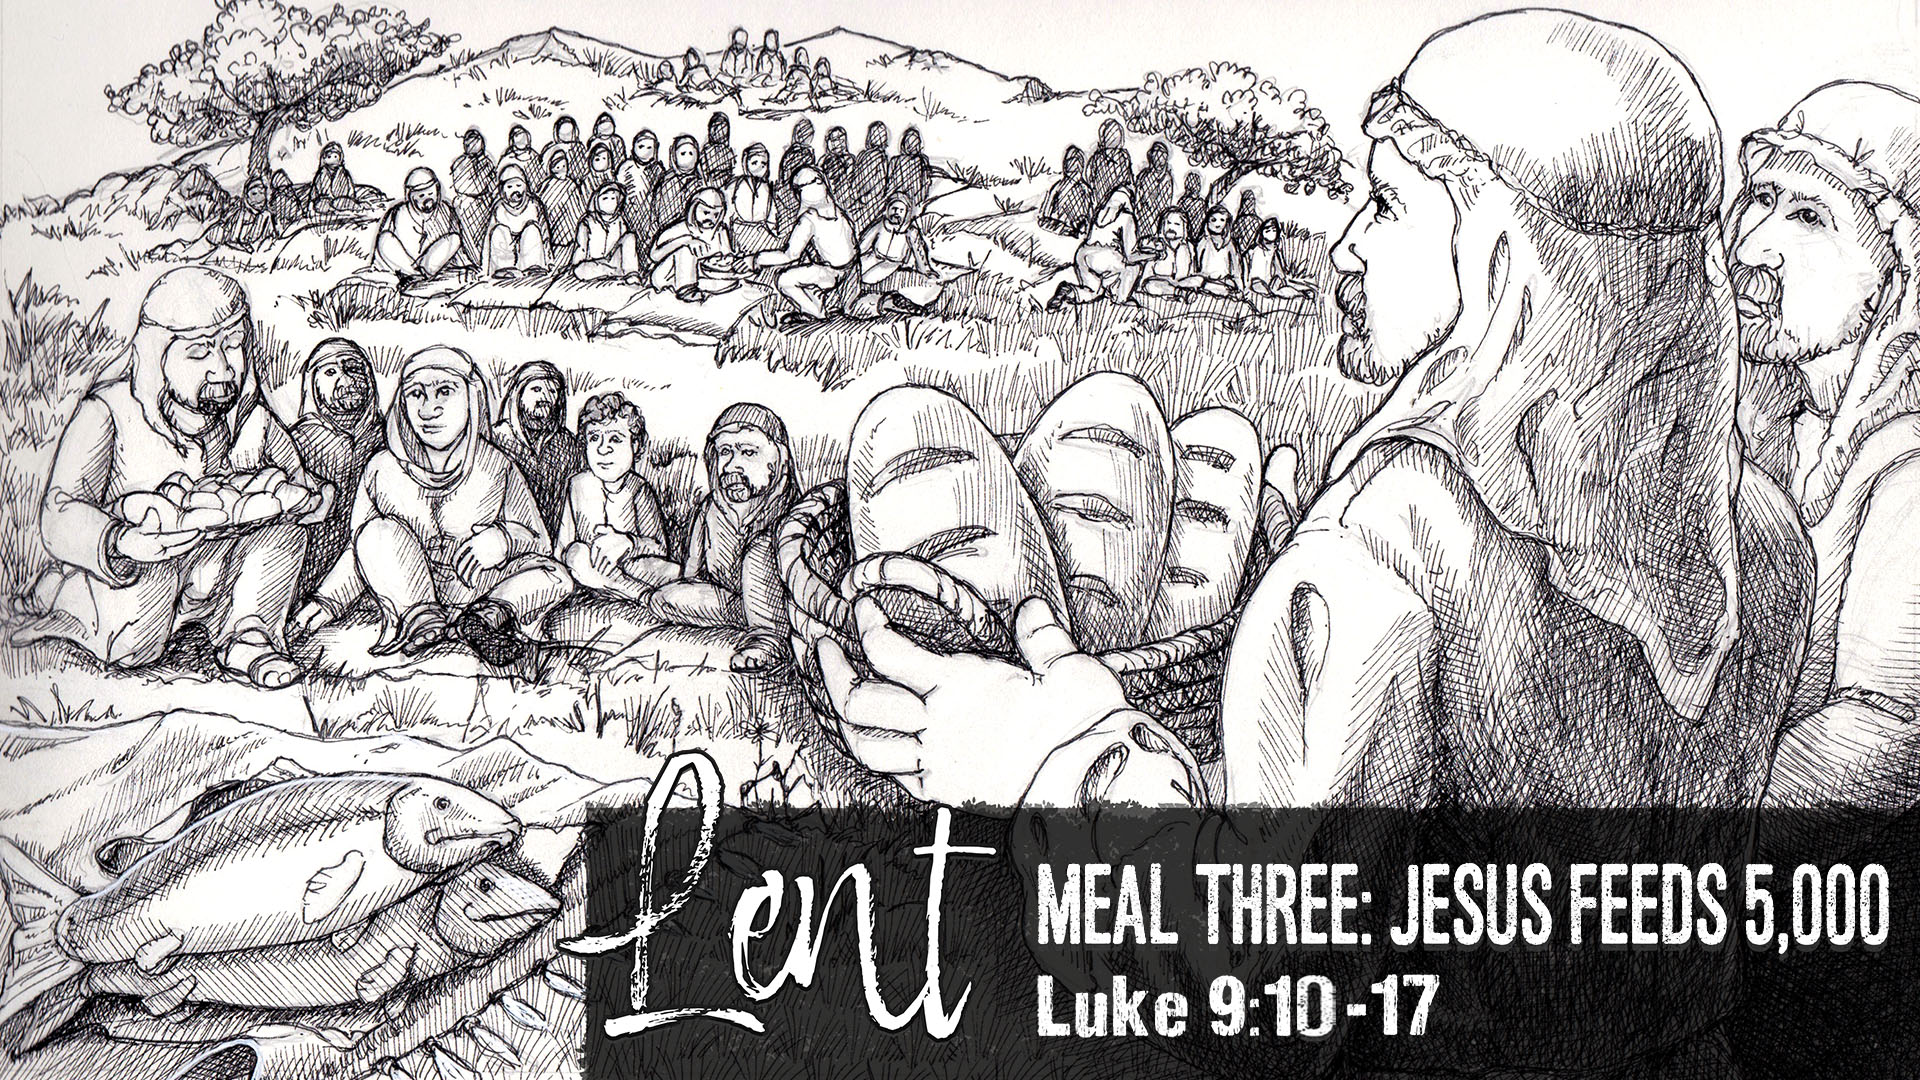 Image for the sermon Jesus Feeds 5,000 (Meal Three)